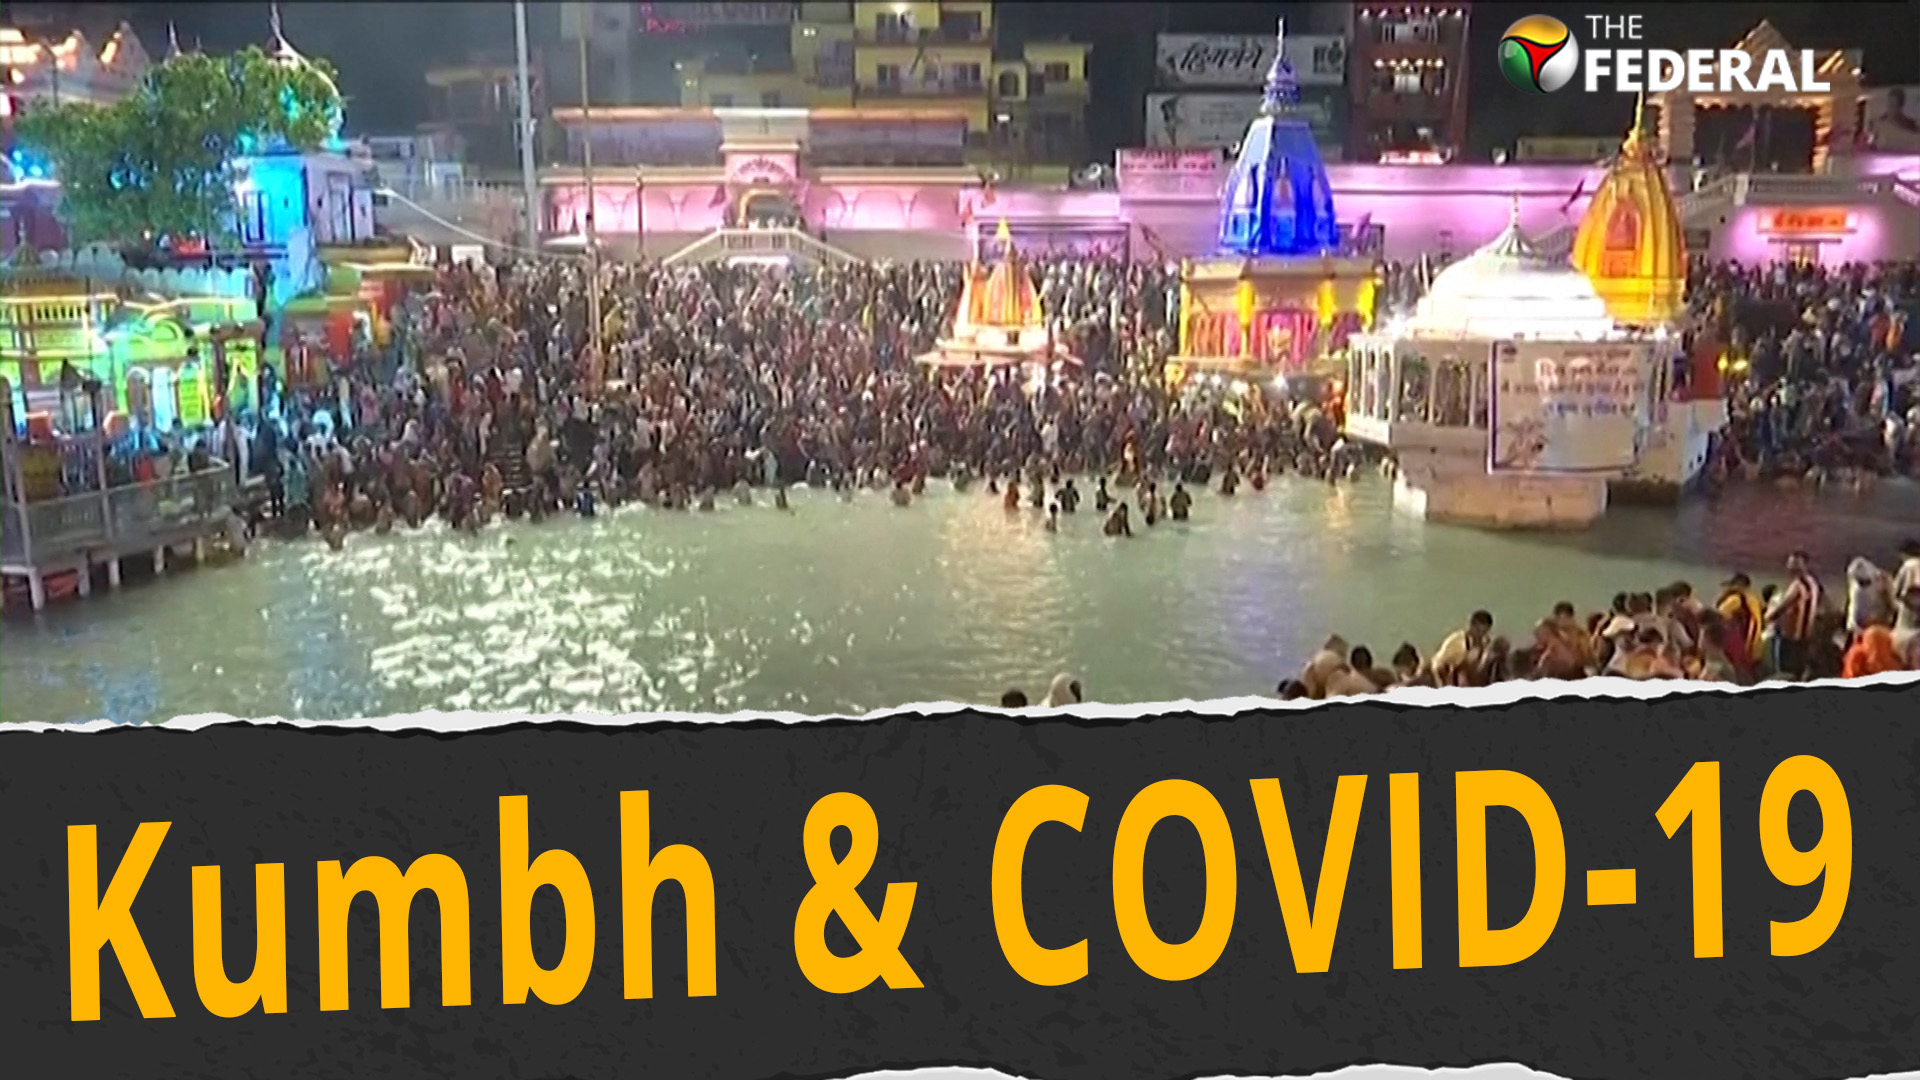 Millions congregate for Kumbh, India has second highest number of COVID cases in the world